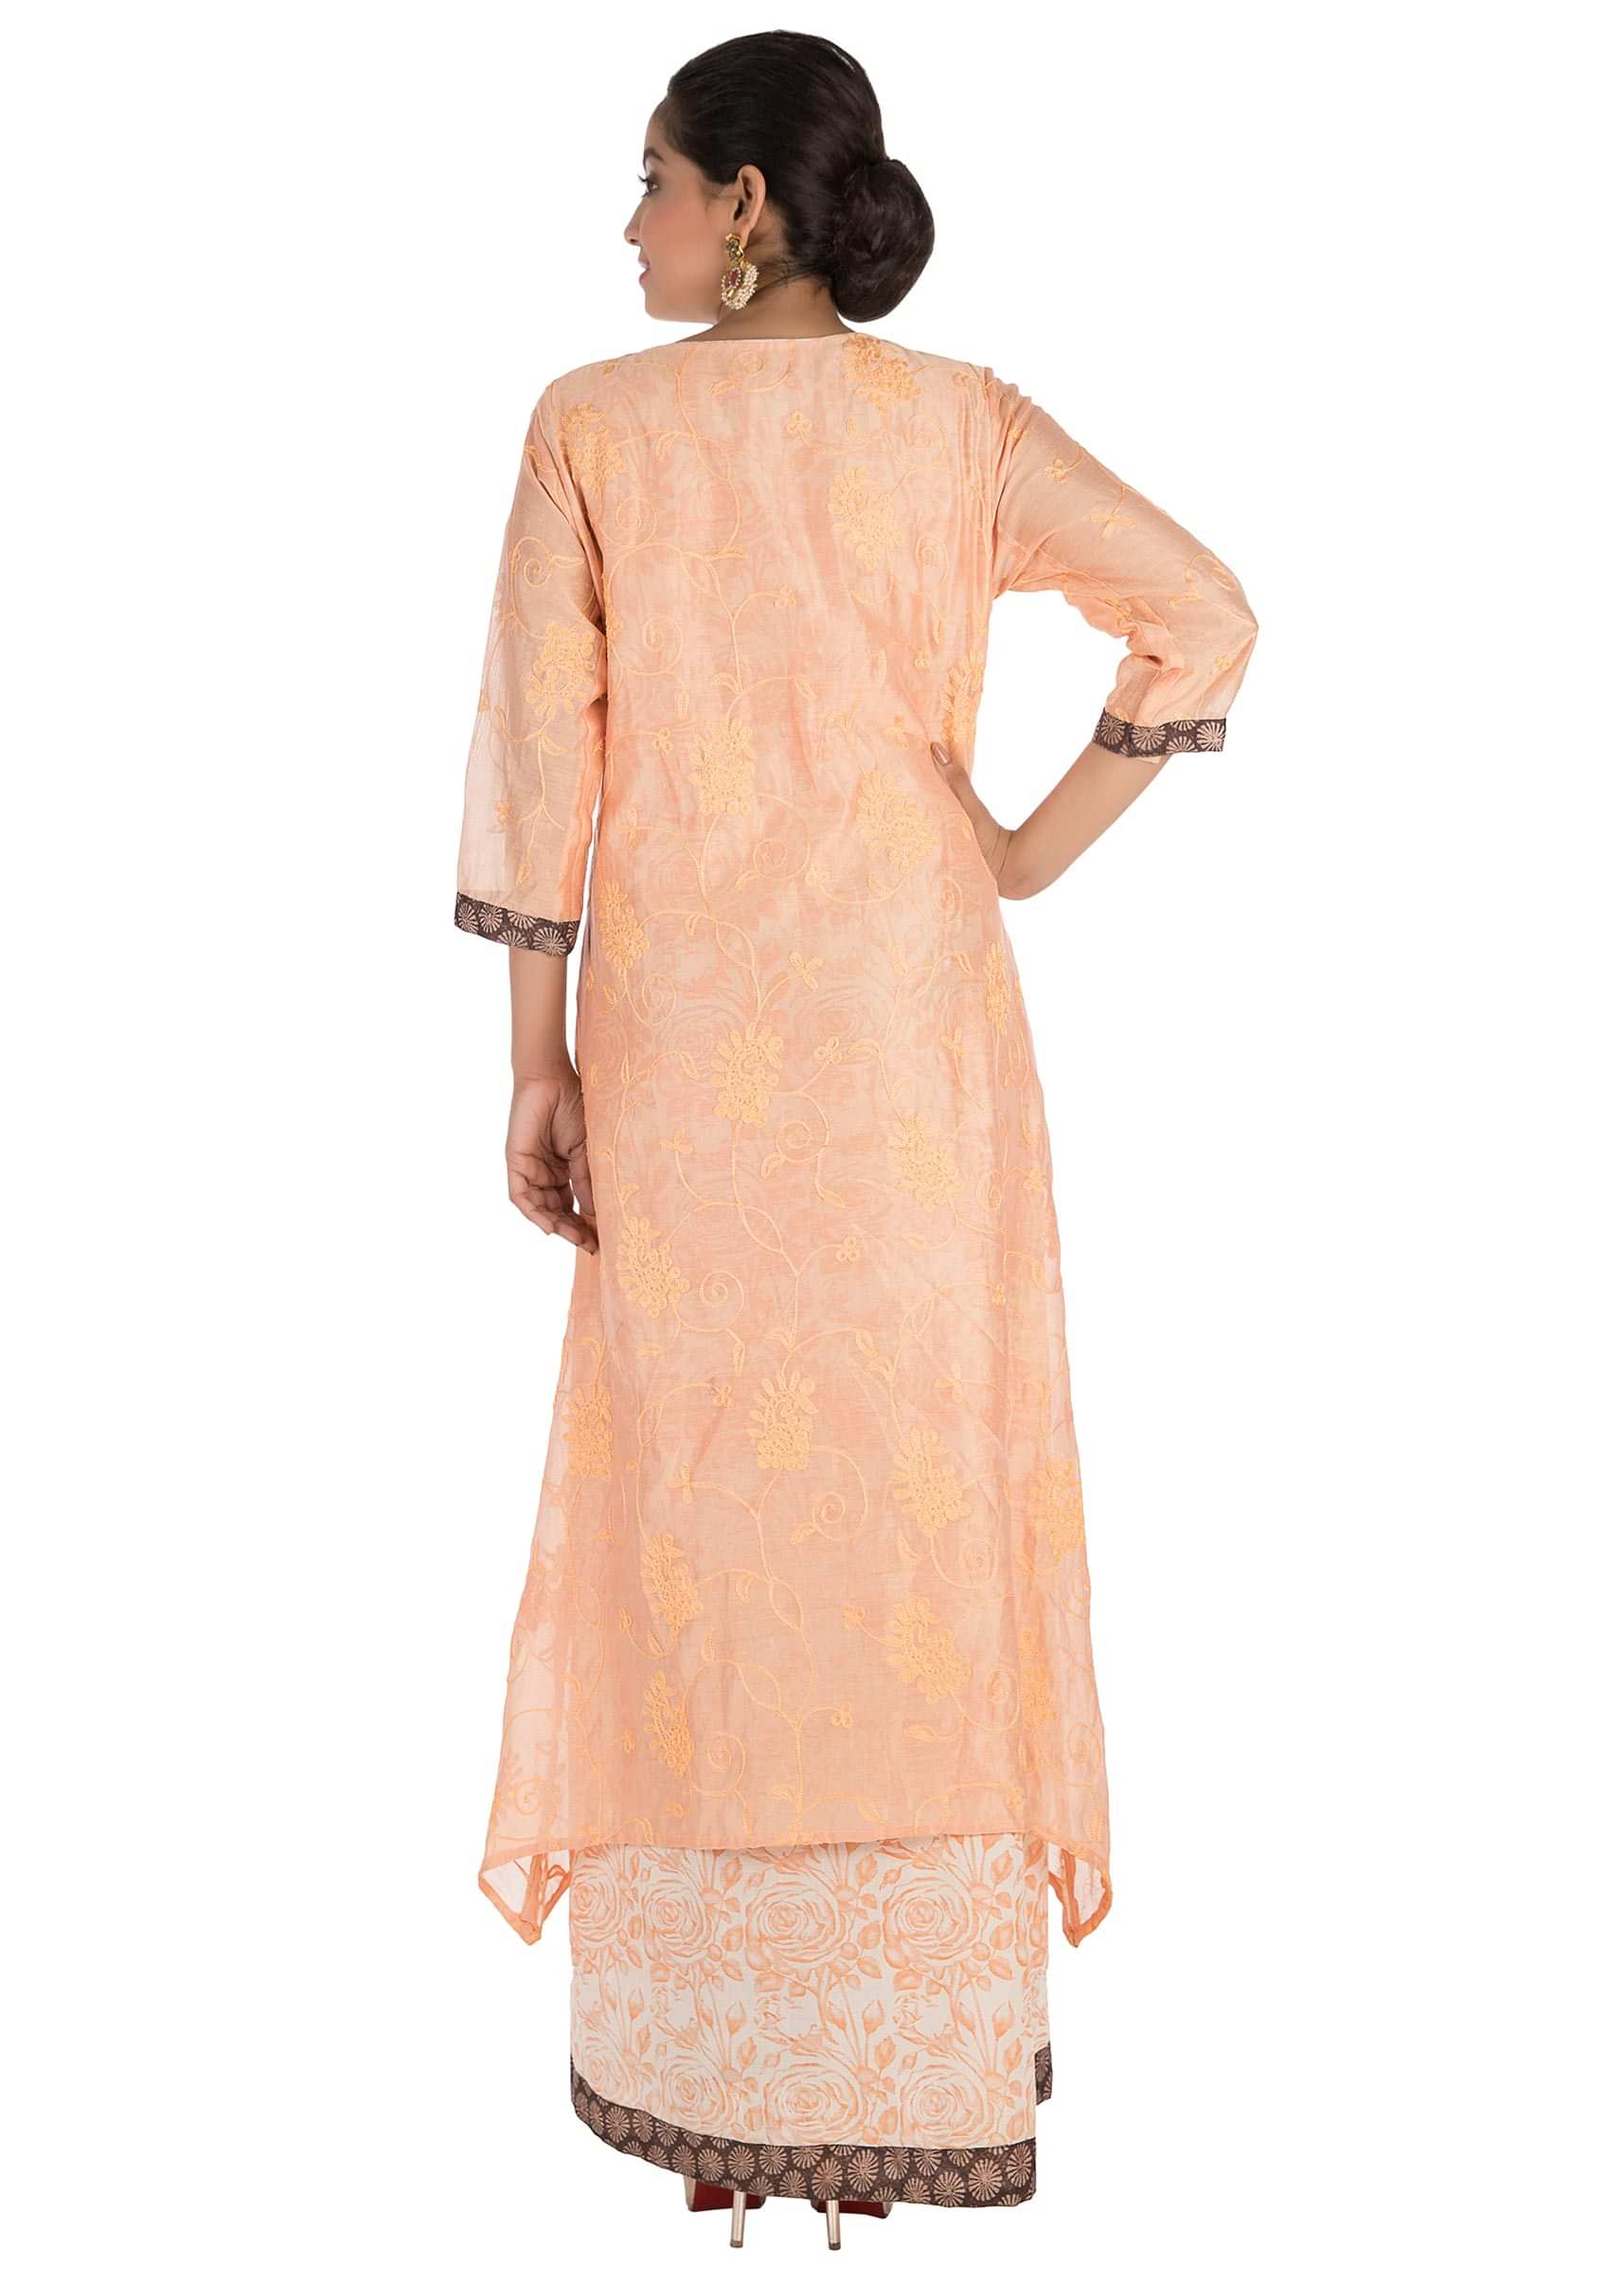 Hand Printed & Embroidered  Pale Orange Double Layer Kurti